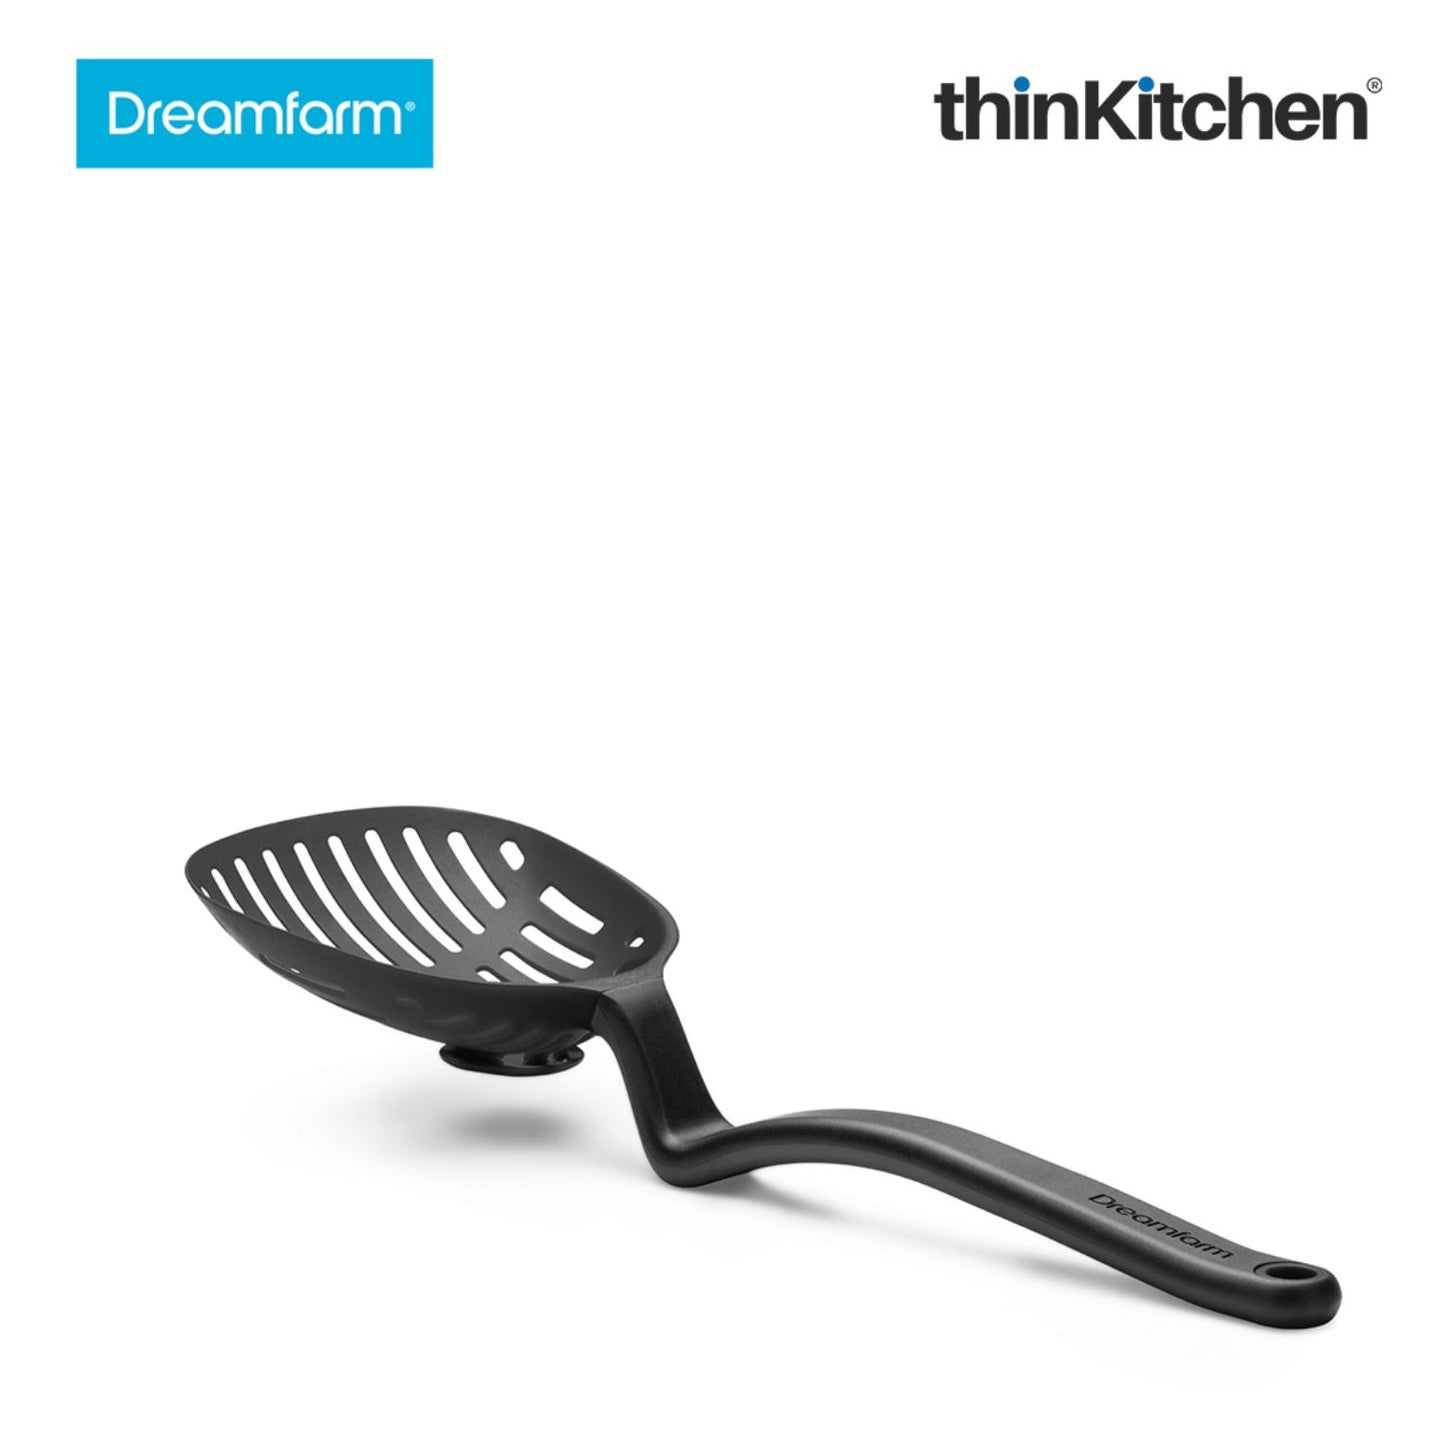 Dreamfarm Lestrain Drip Catching Sit Up Scoop Strainer Keeps Bench Tops Mess Free Flexible Dripless Slotted Spoon Food Strainer Black